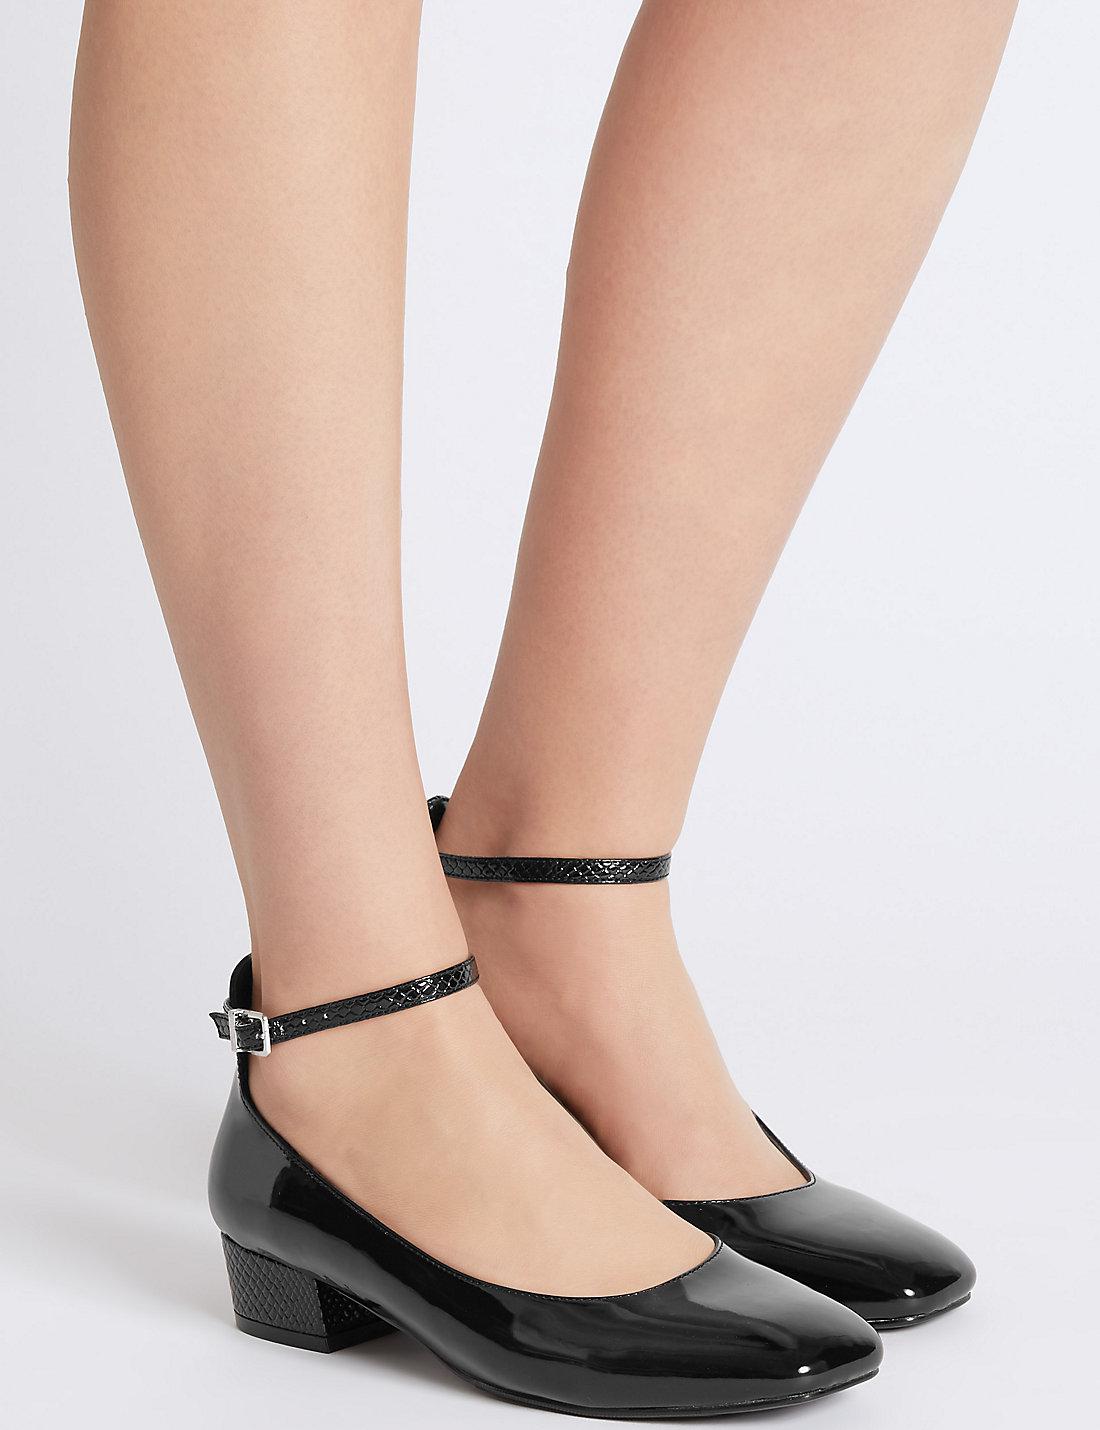 marks and spencer black court shoes